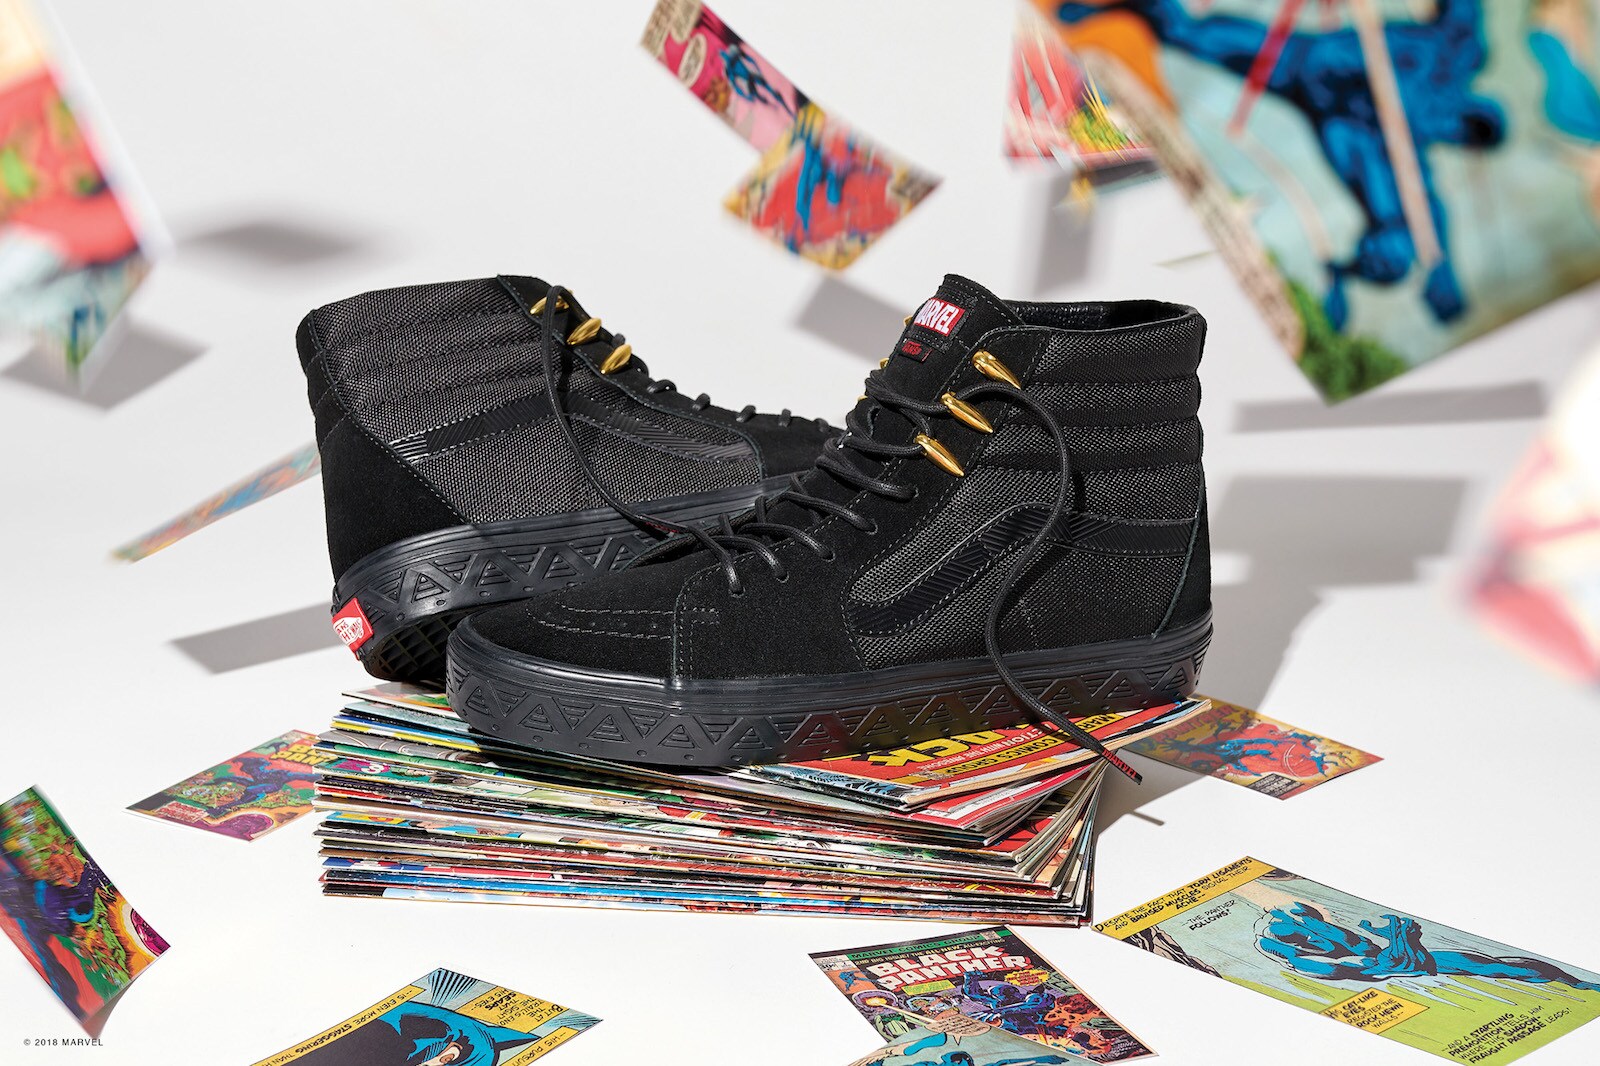 Items from the Marvel x Vans Heroic New Collection